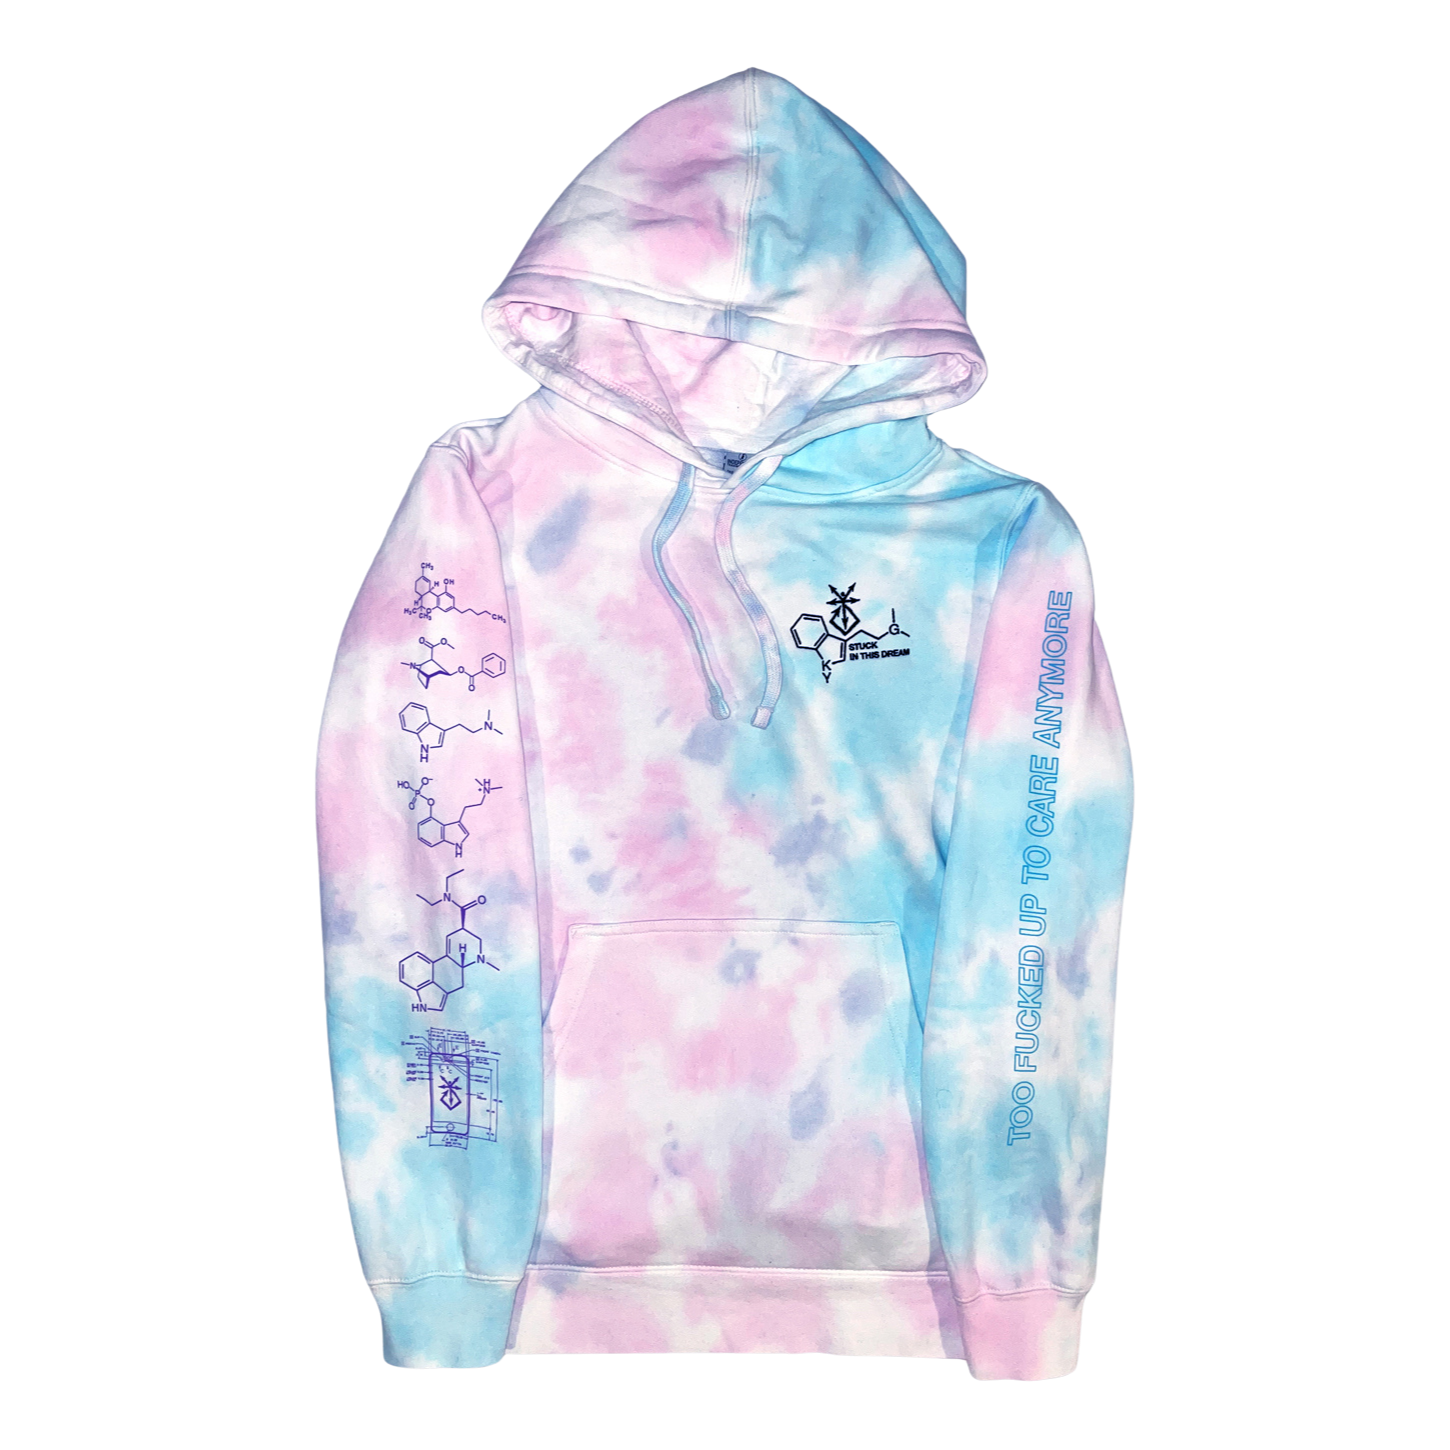 NUMB INVERTED BLACKLIGHT REACTIVE COTTON CANDY TIE-DYE PULLOVER HOODIE - Kill Your God